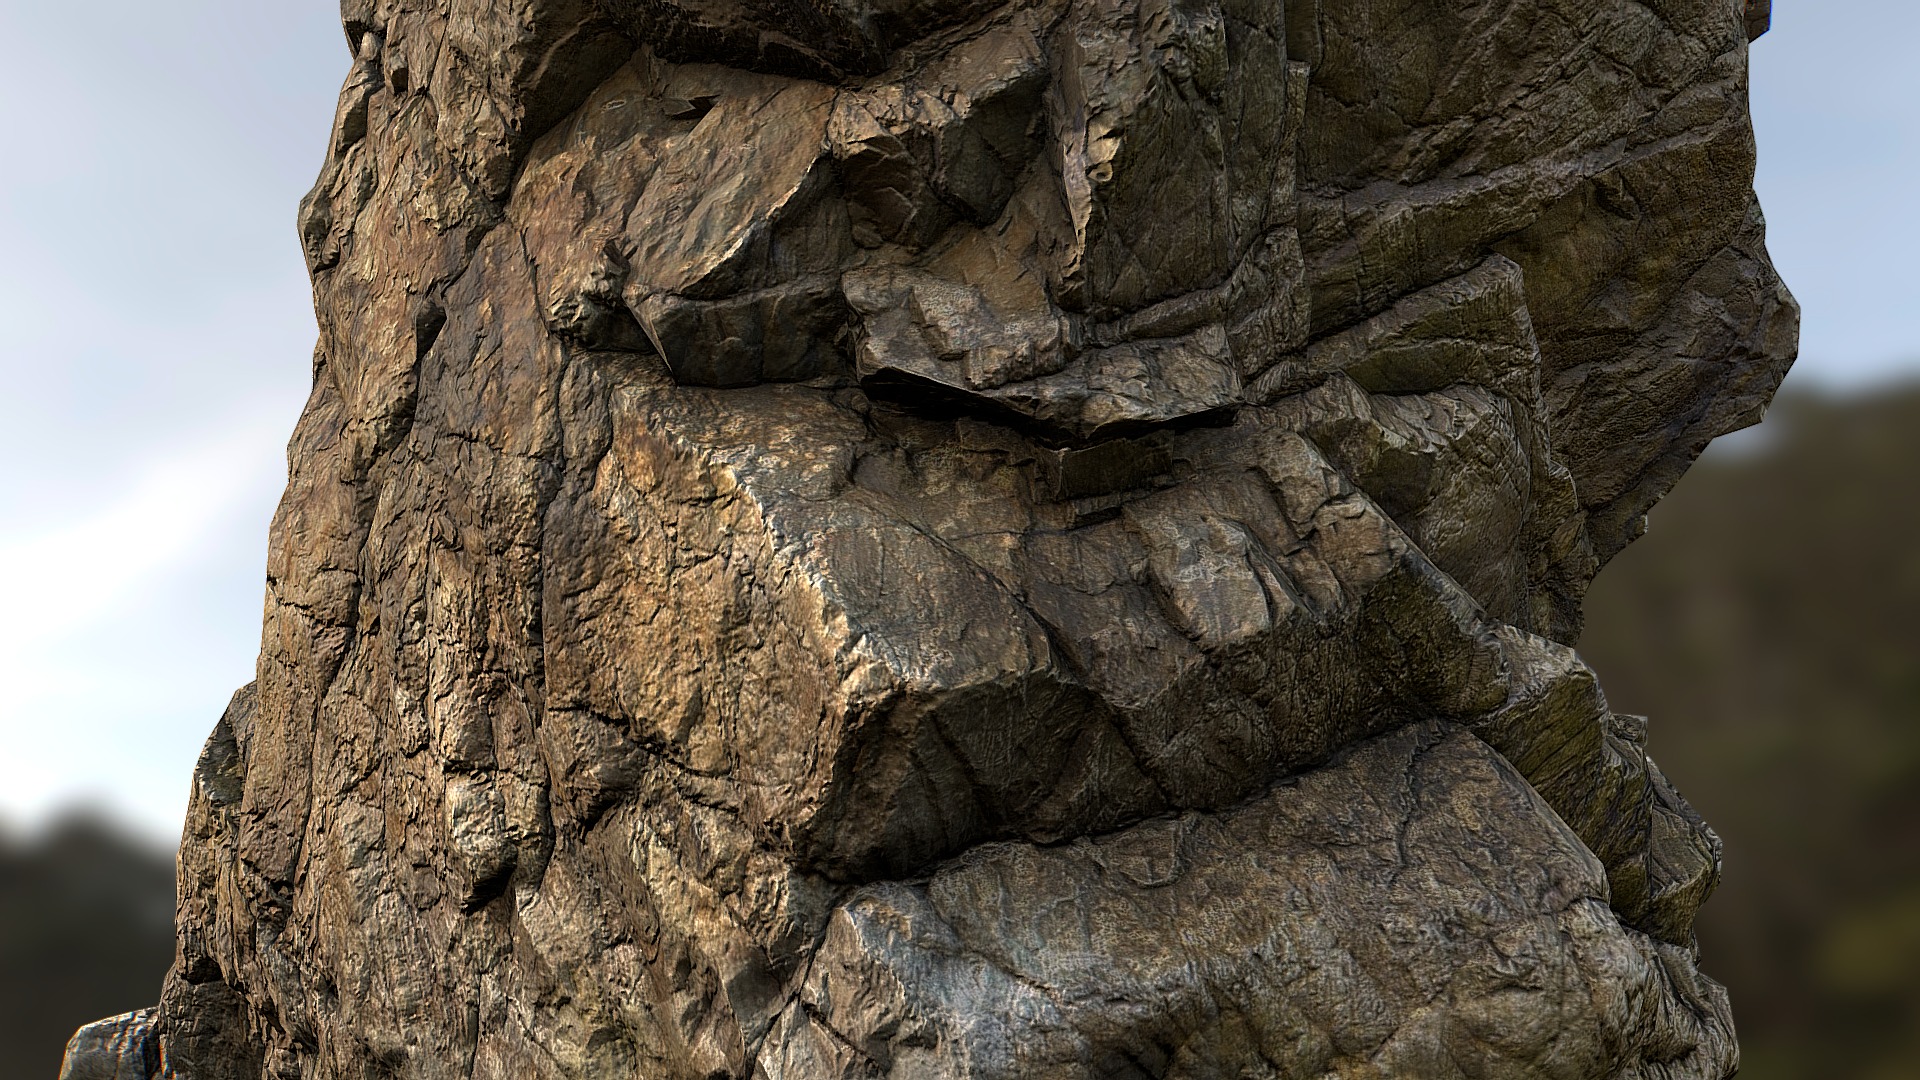 3D scan conformed for real-time use, PBR materials constructed with the help of Unity's De-Lighting app. Shot in bright sunshine on location near Malin Head, Donegal, Ireland.

To find out more about how this was put together, check out www.petemcnally.com - Sea stack 3D Game ready asset - Buy Royalty Free 3D model by petemc 3d model